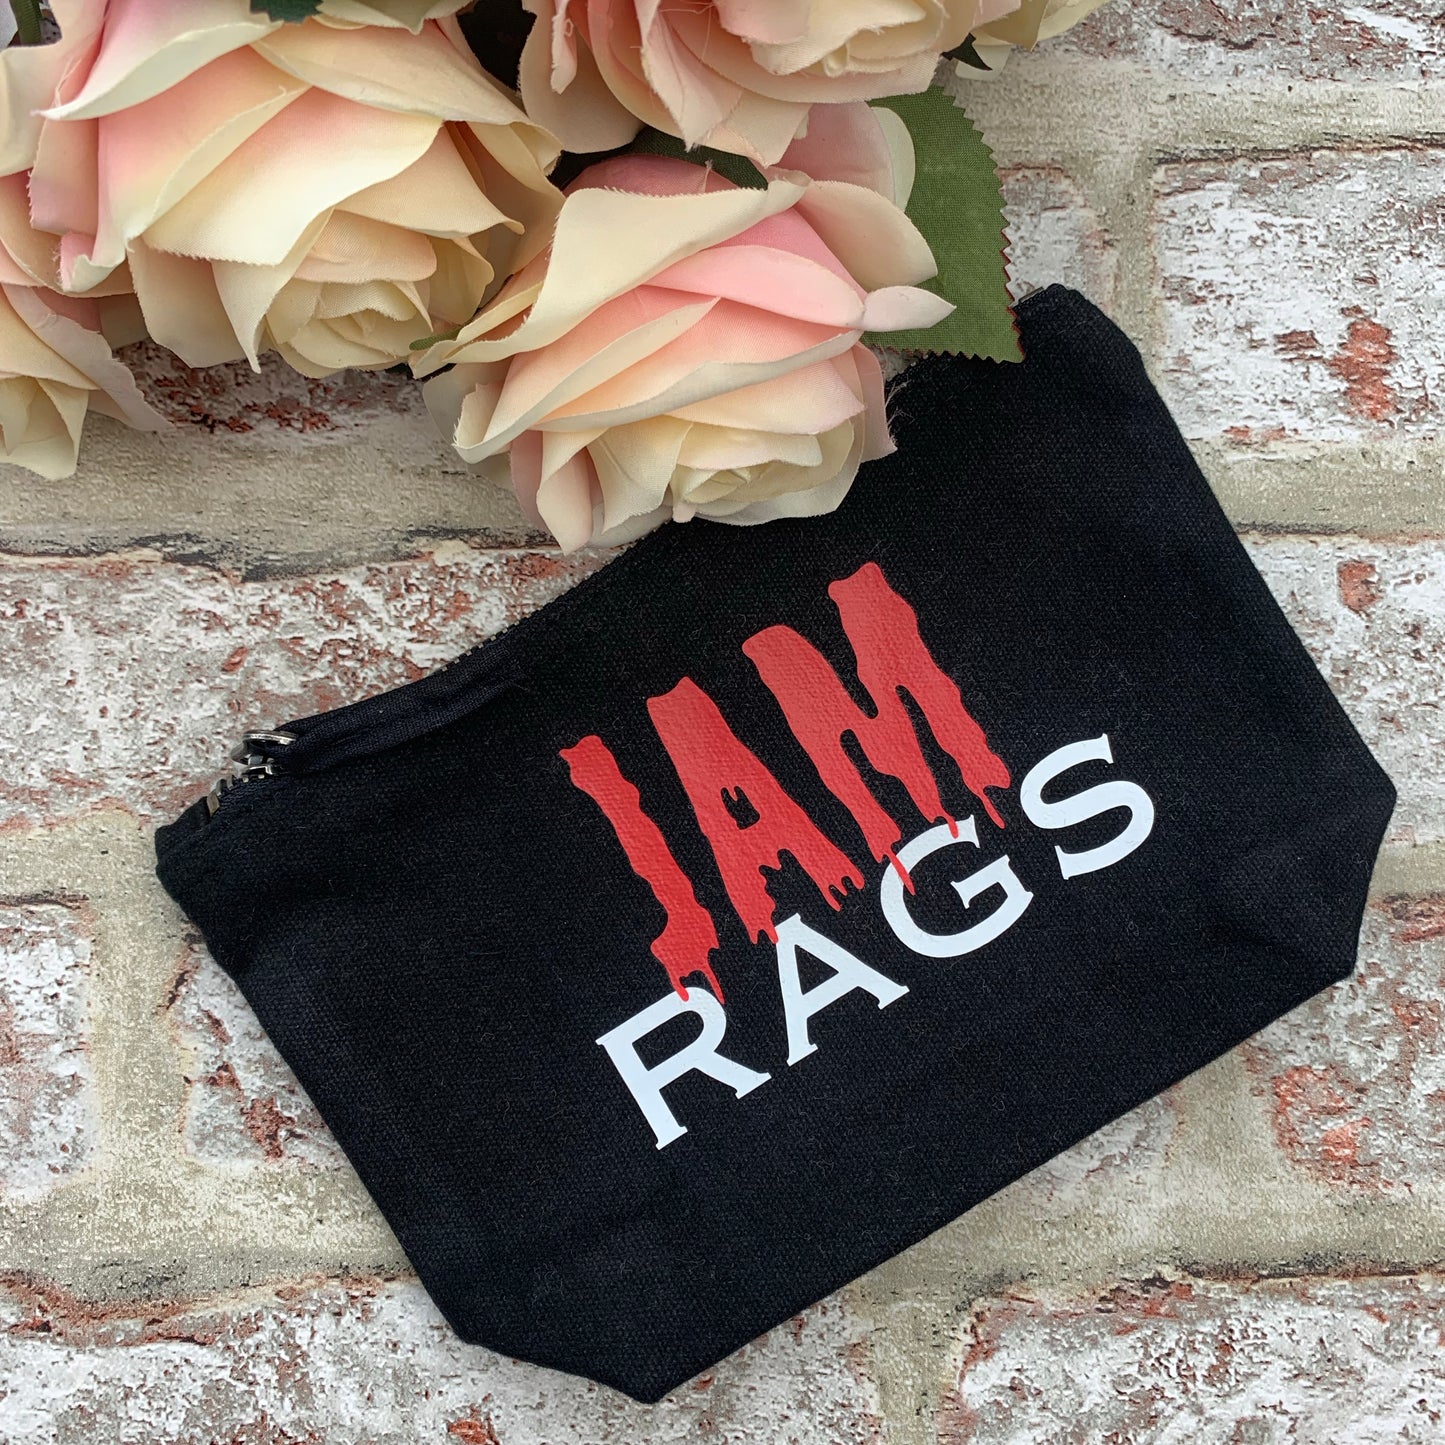 Jam Rags - Tampon, pad, sanitary bag / Period Pouch